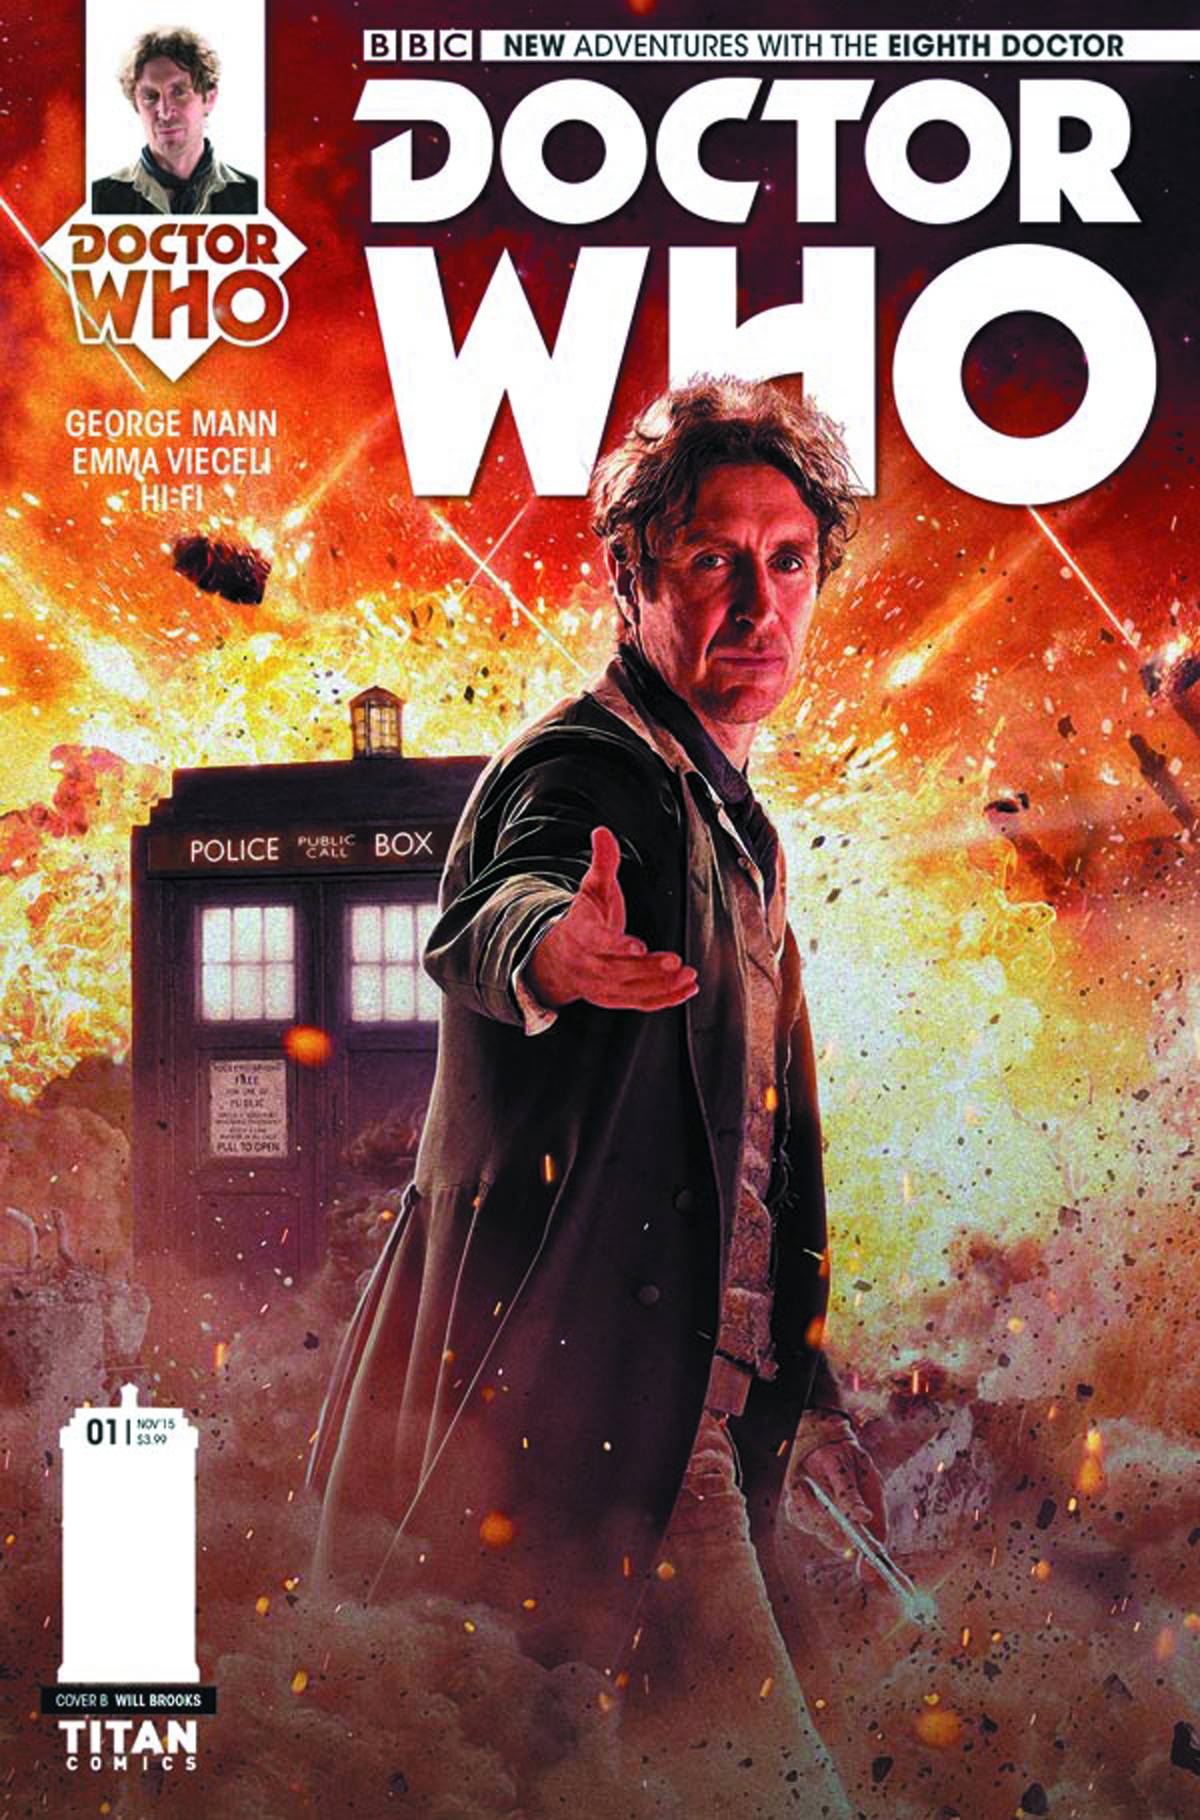 Doctor Who 8th #5 Cover B Photo